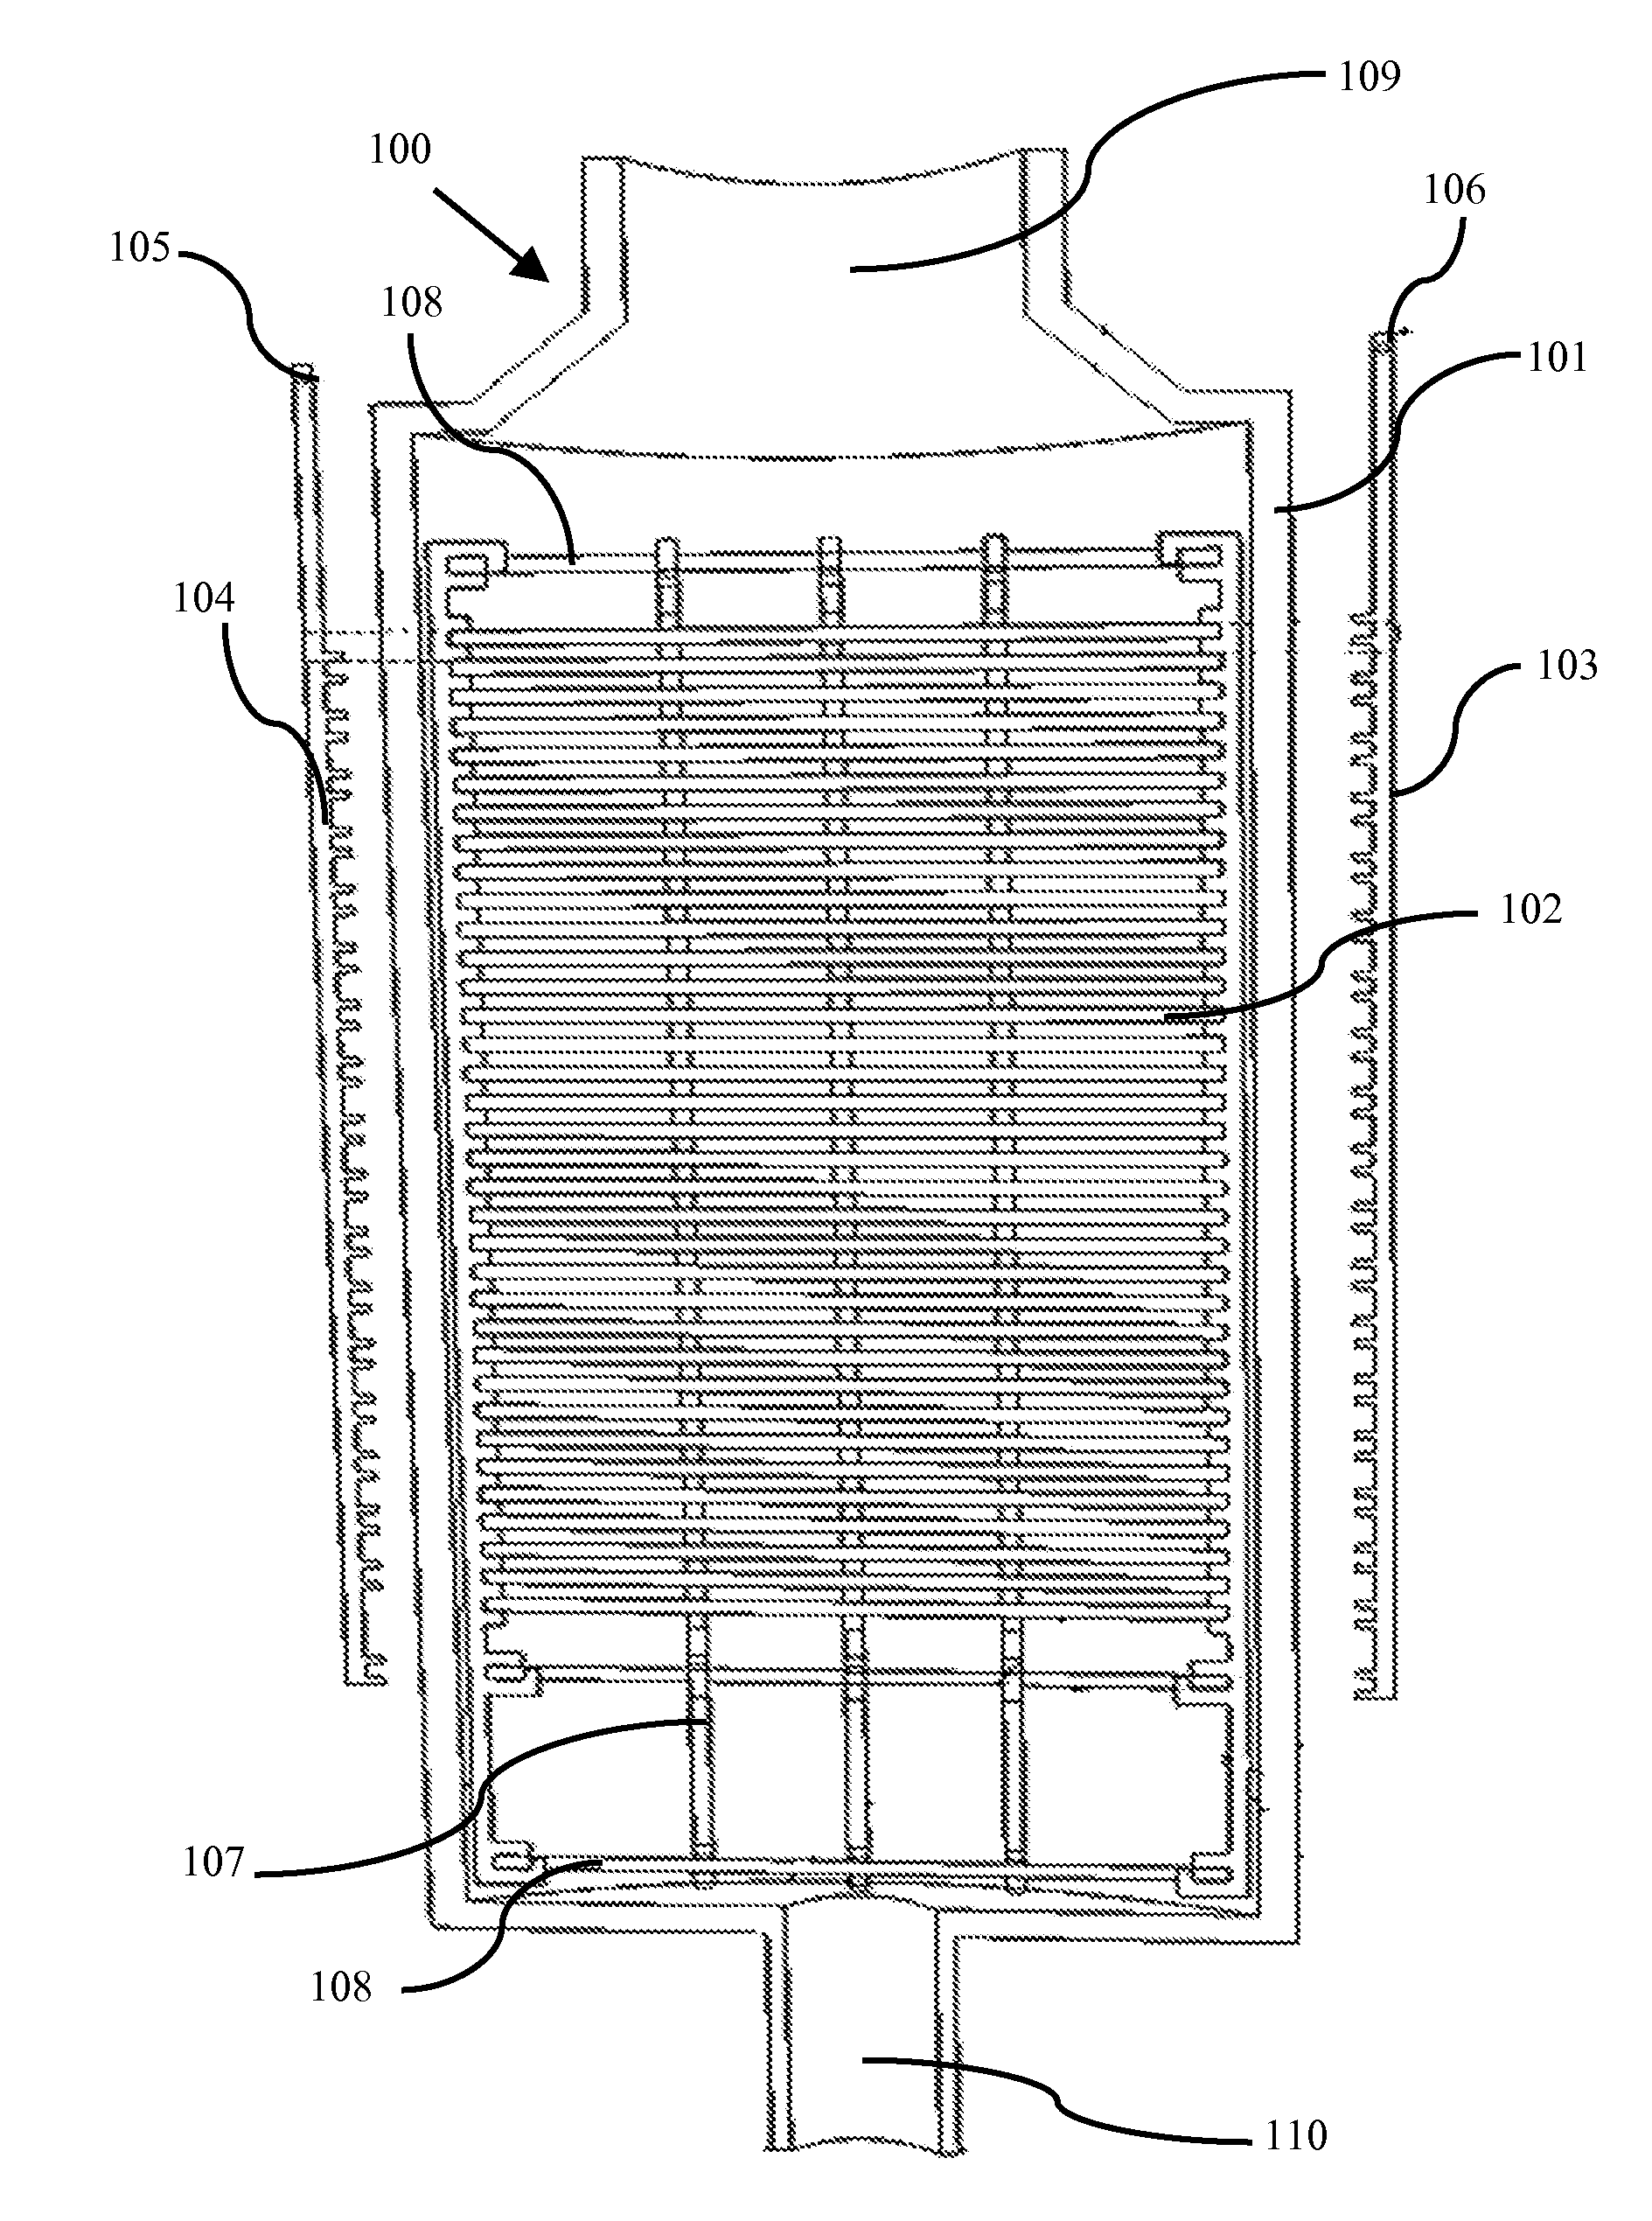 System and method for generating hydrogen and oxygen gases